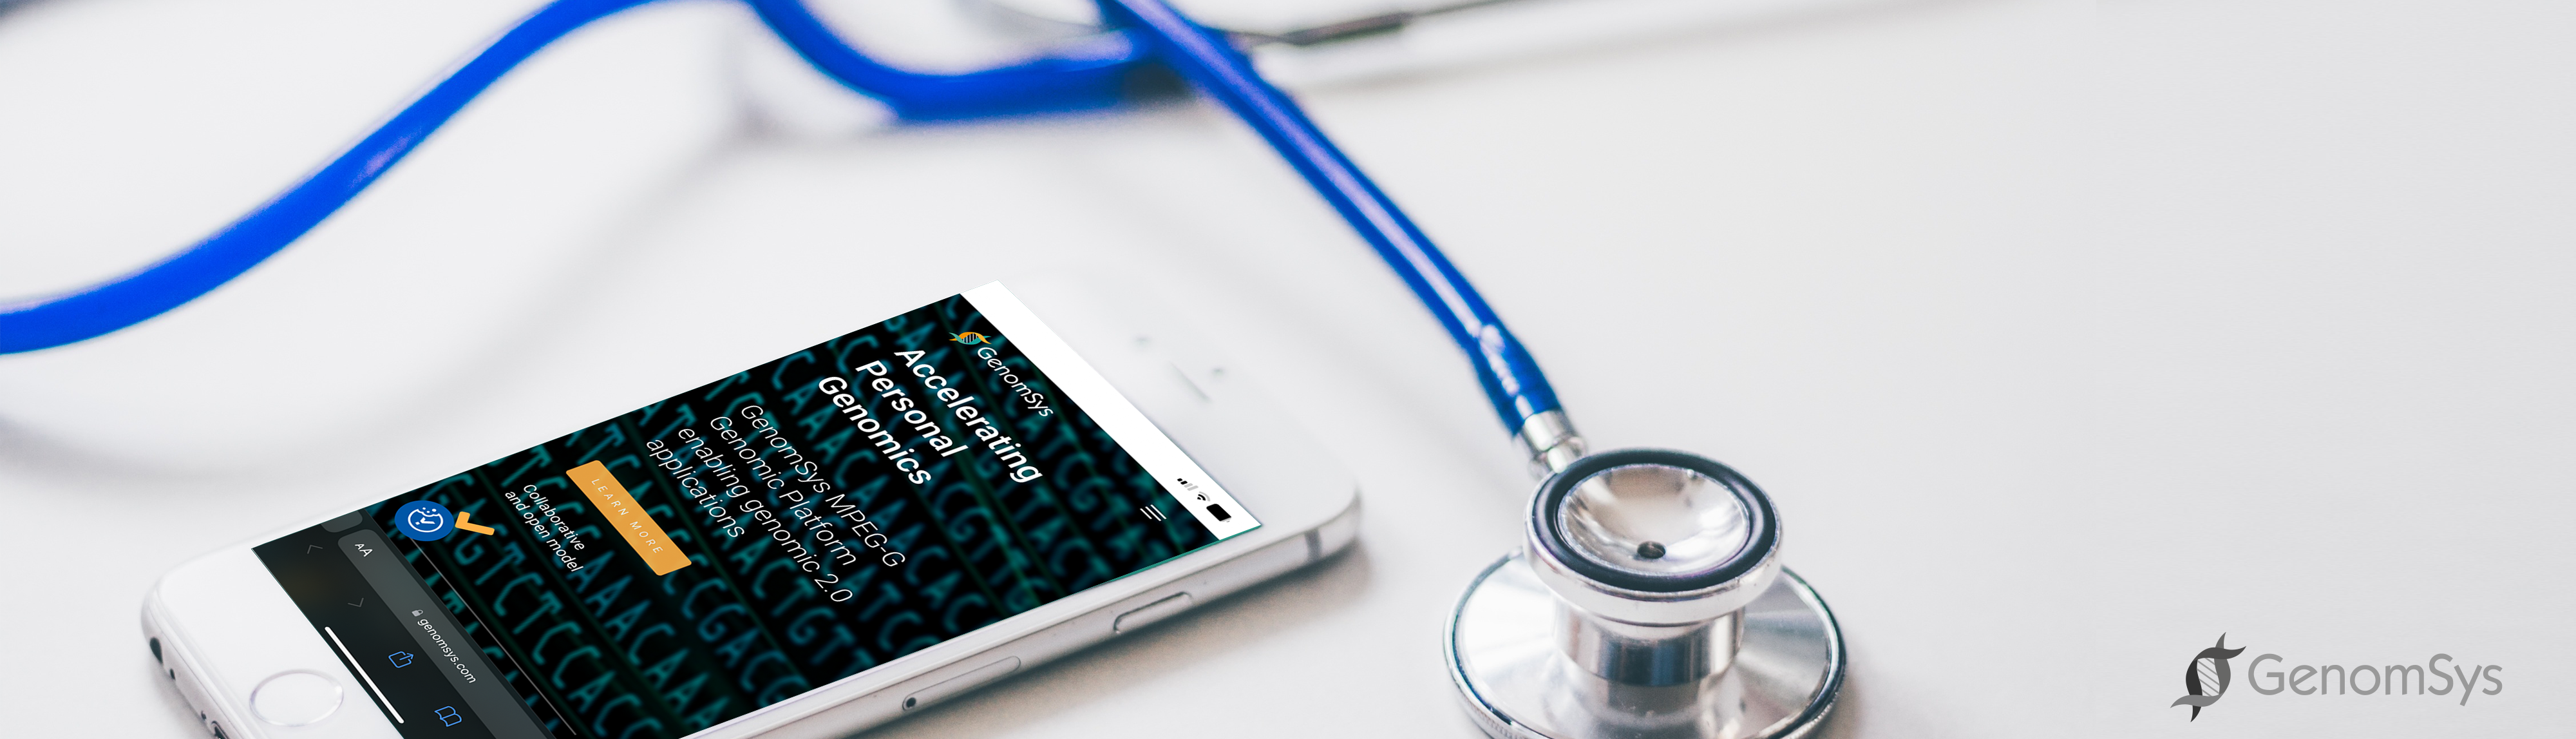 mHealth – the 21st century’s mobility in Healthcare – Part 3